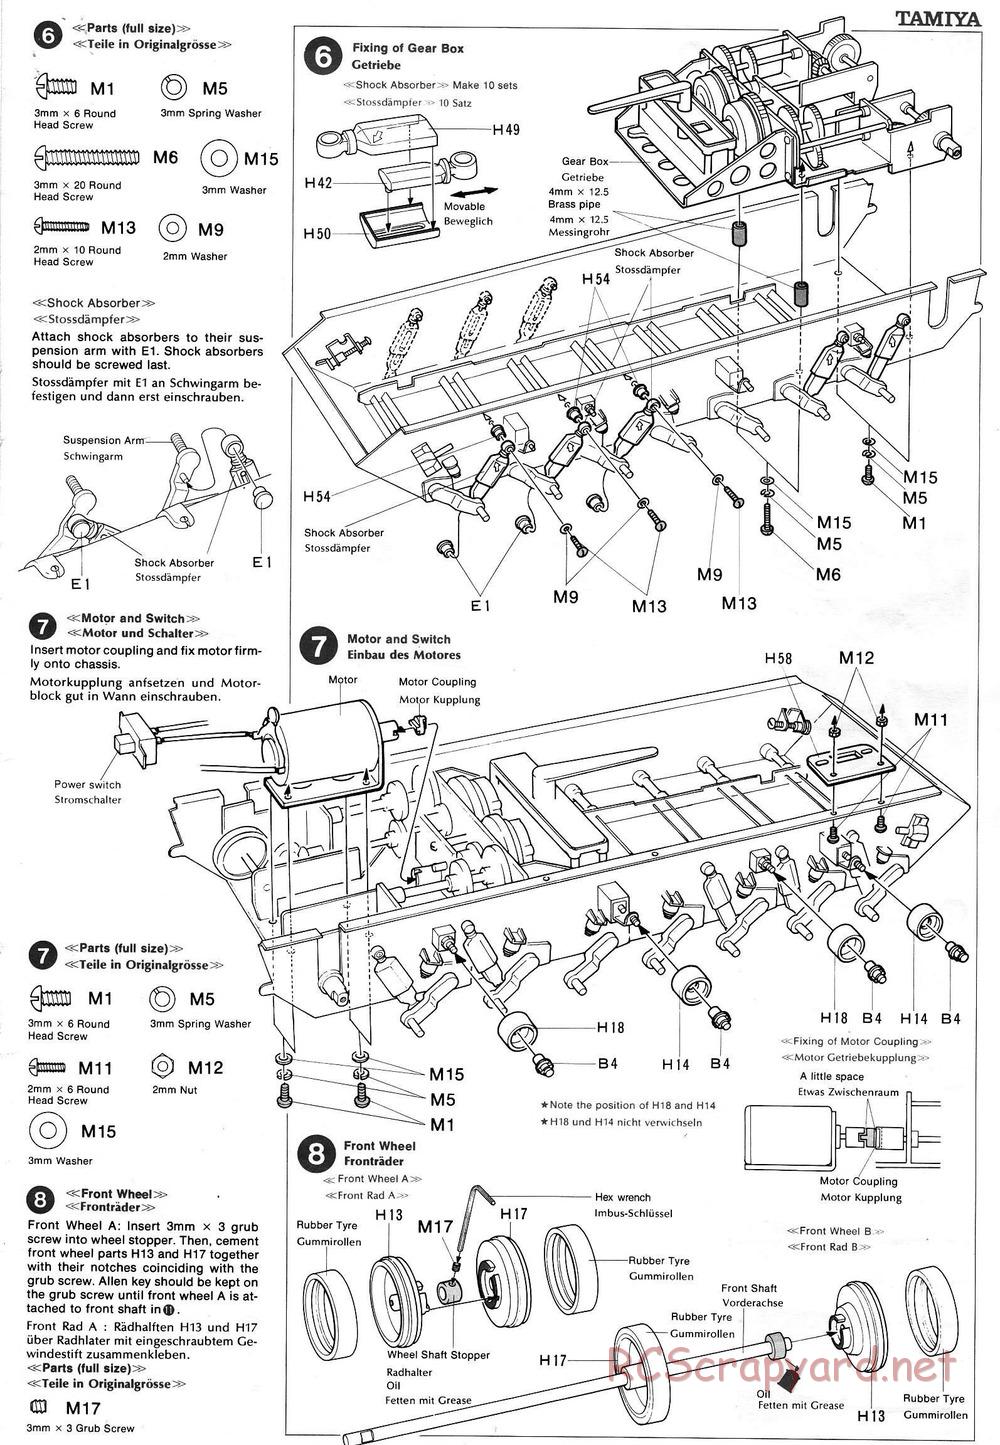 Tamiya - Flakpanzer Gepard - 1/16 Scale Chassis - Manual - Page 5